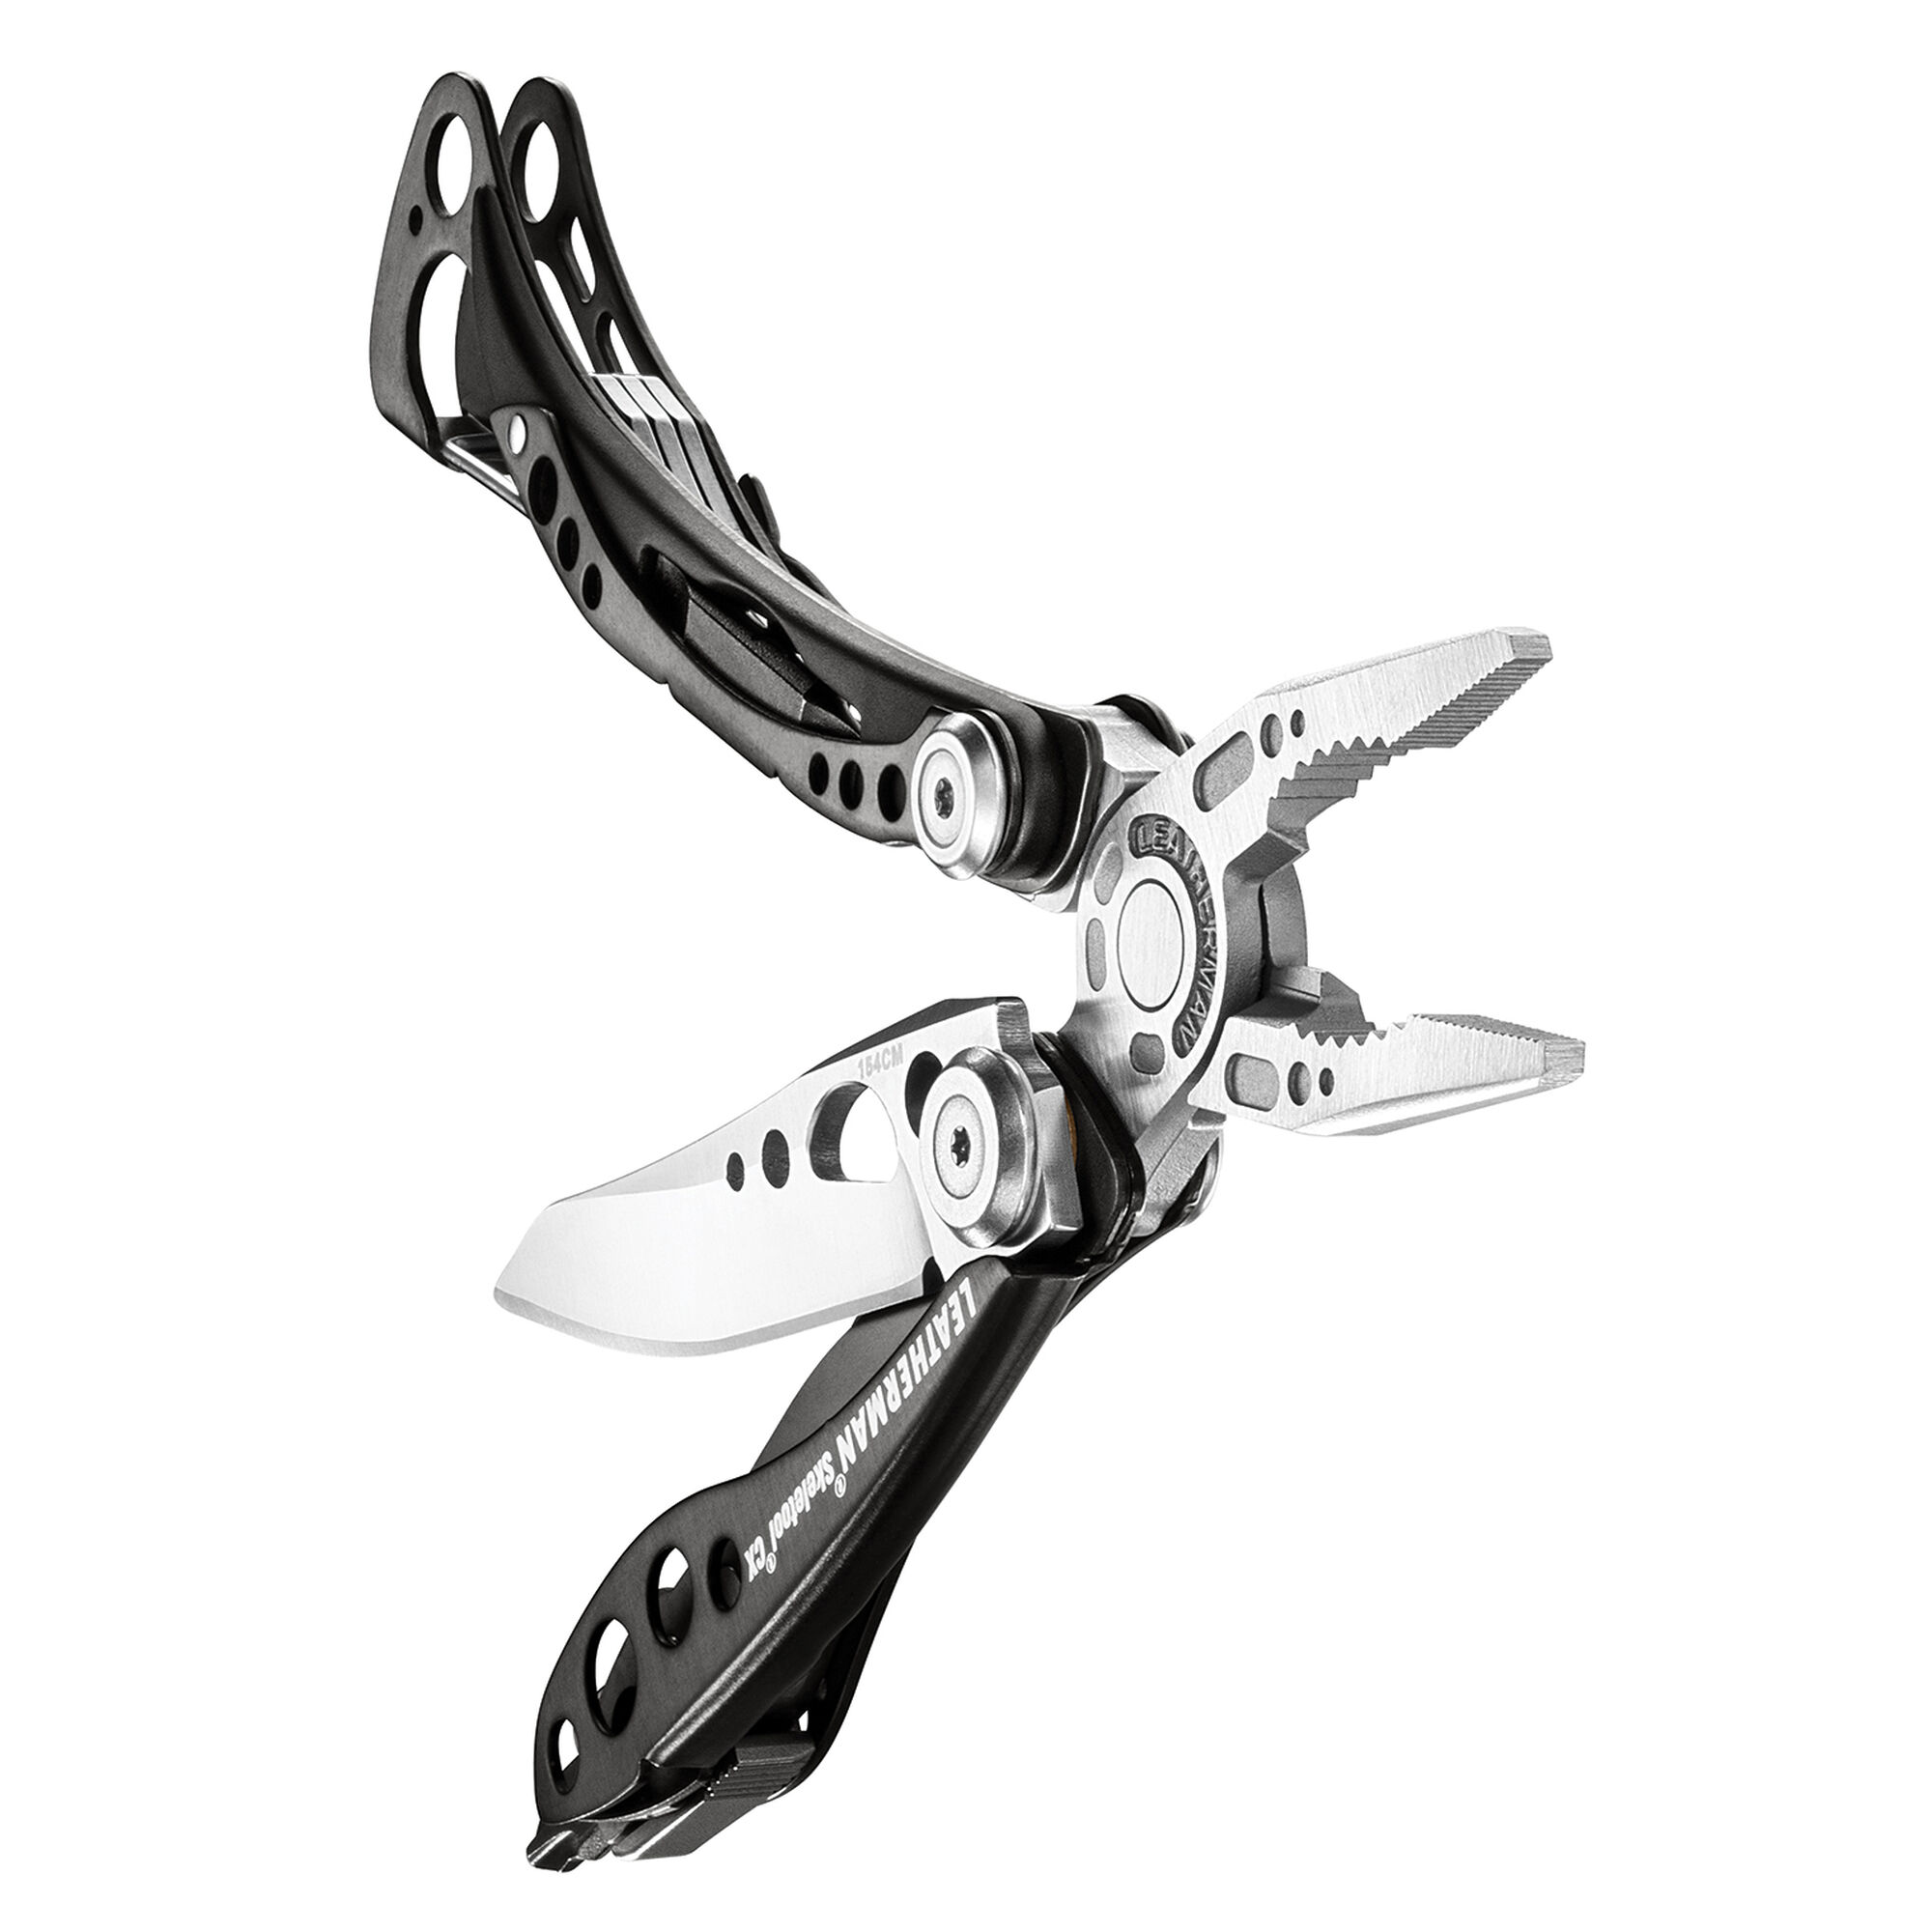 LEATHERMAN, Skeletool, 7-in-1 Lightweight, Minimalist Multi-tool for  Everyday Carry (EDC), Home, Garden & Outdoors, Green 